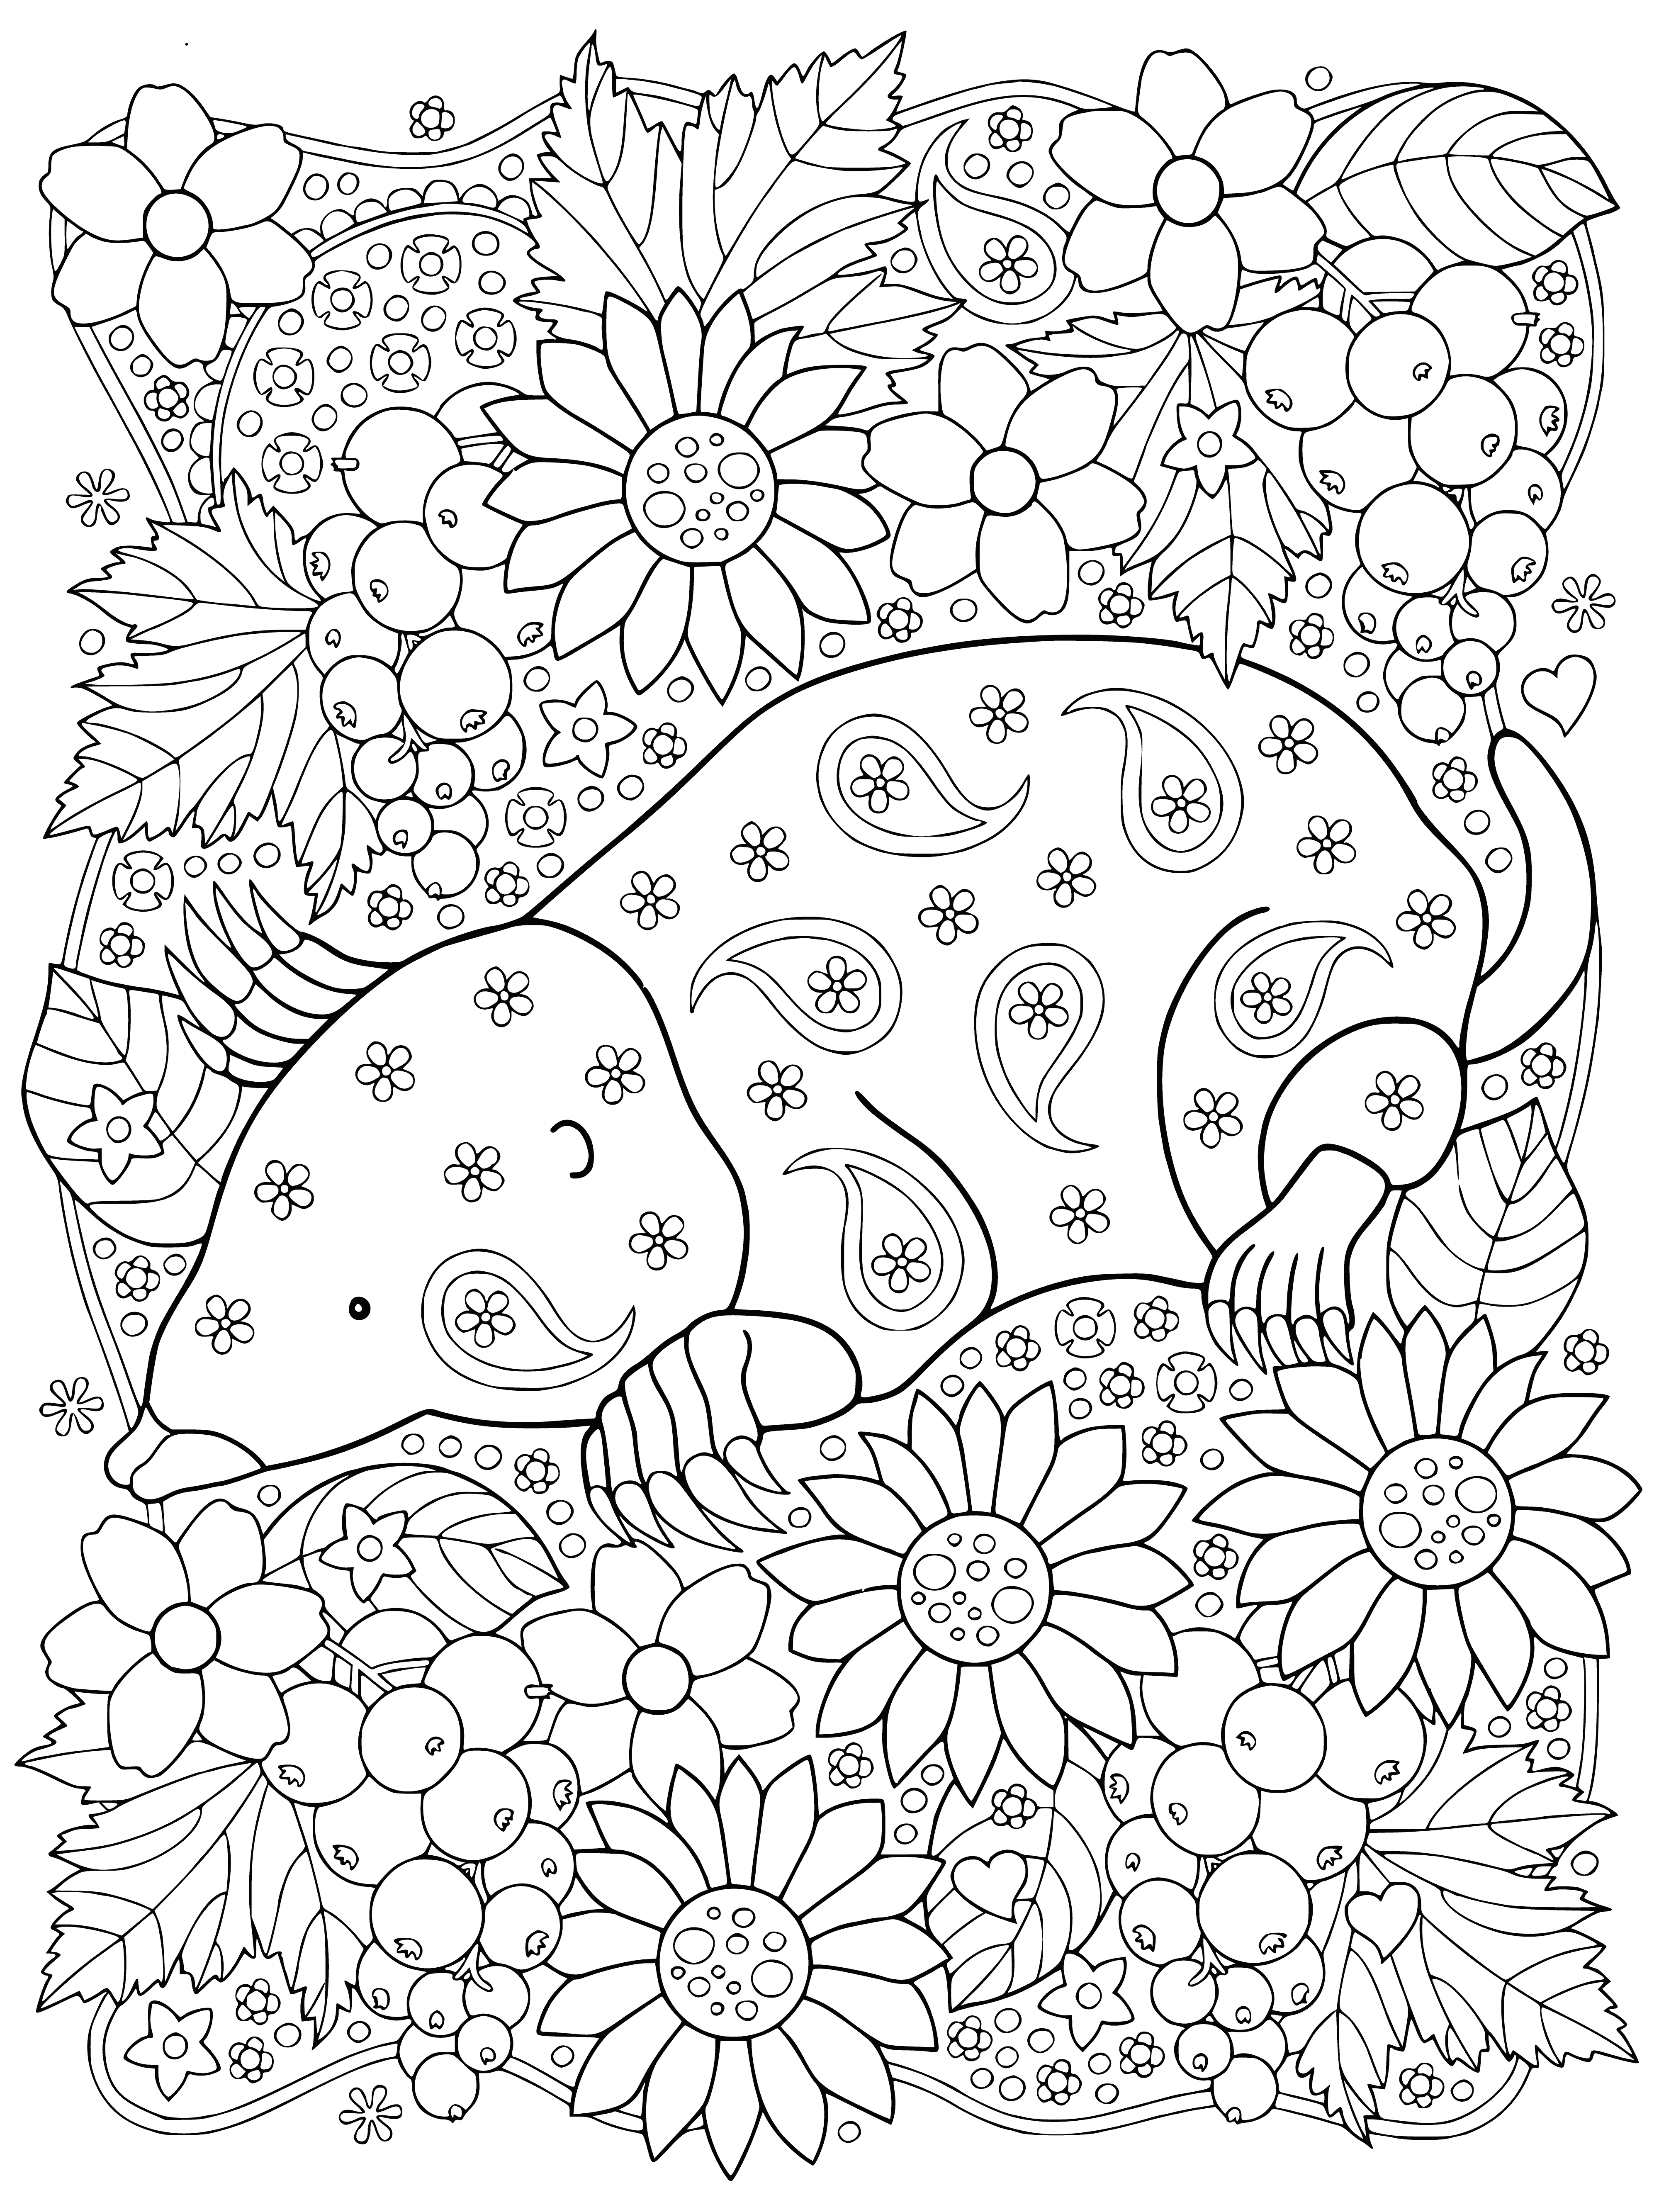 Mole in the garden coloring page